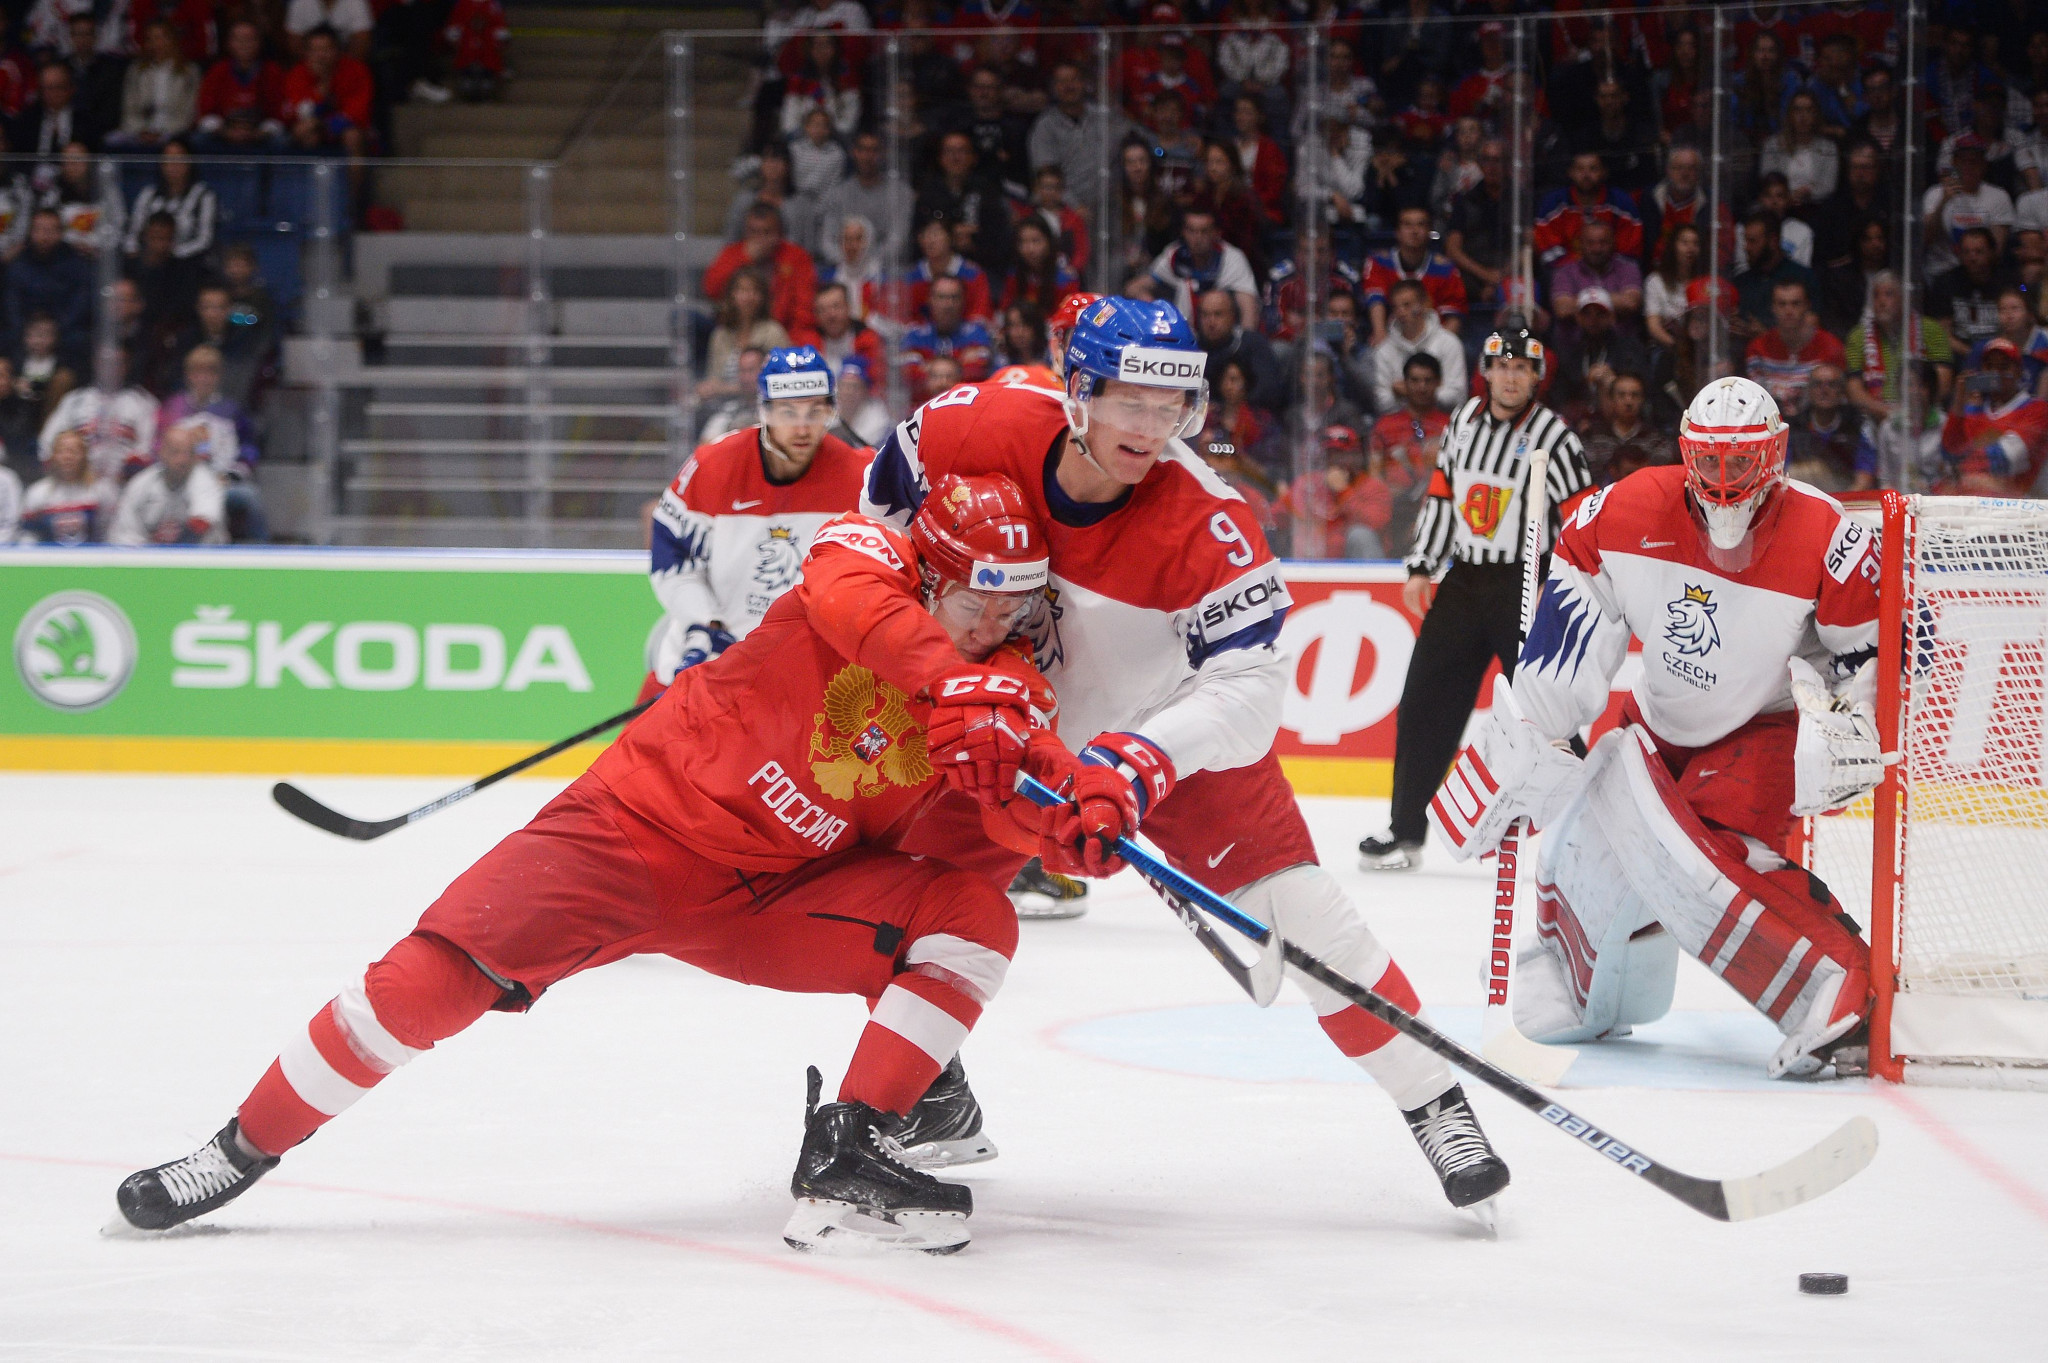 Sponsors such as Skoda had threatened to withdraw from the IIHF Men's World Championship if it remained in Belarus ©Getty Images